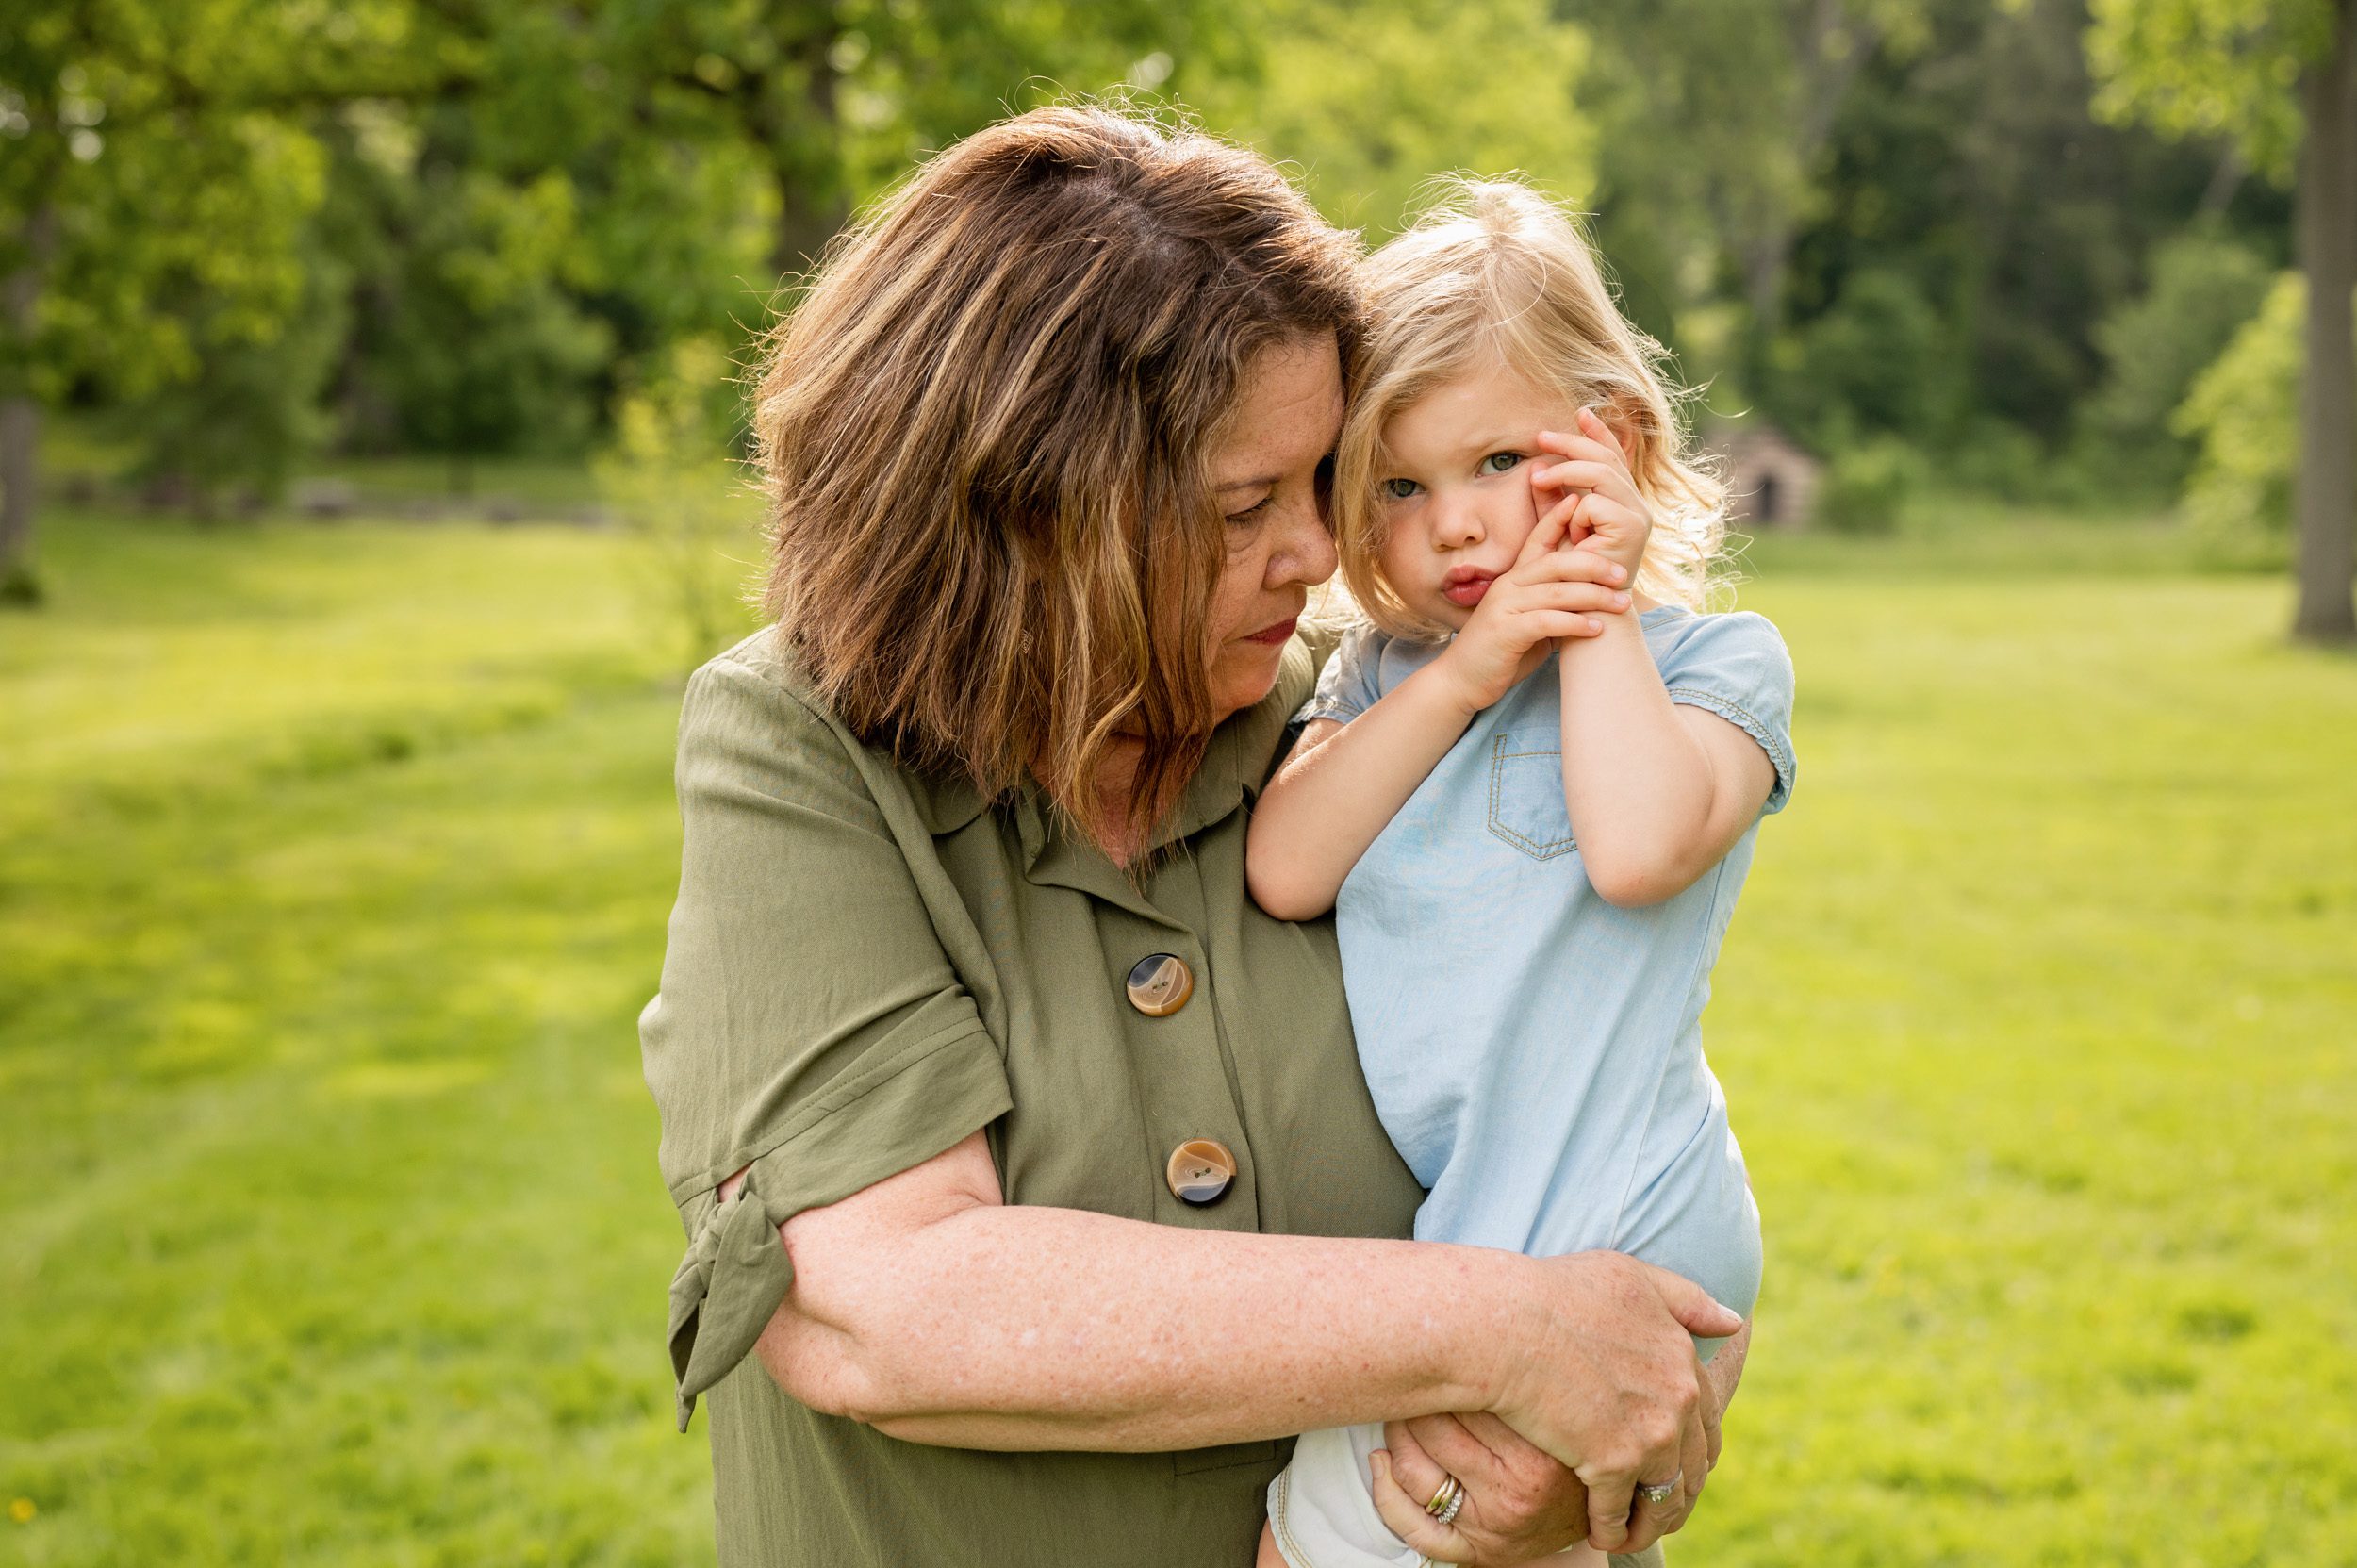 A grandmother snuggling with her granddaughter in a grassy field during an extended family photo session